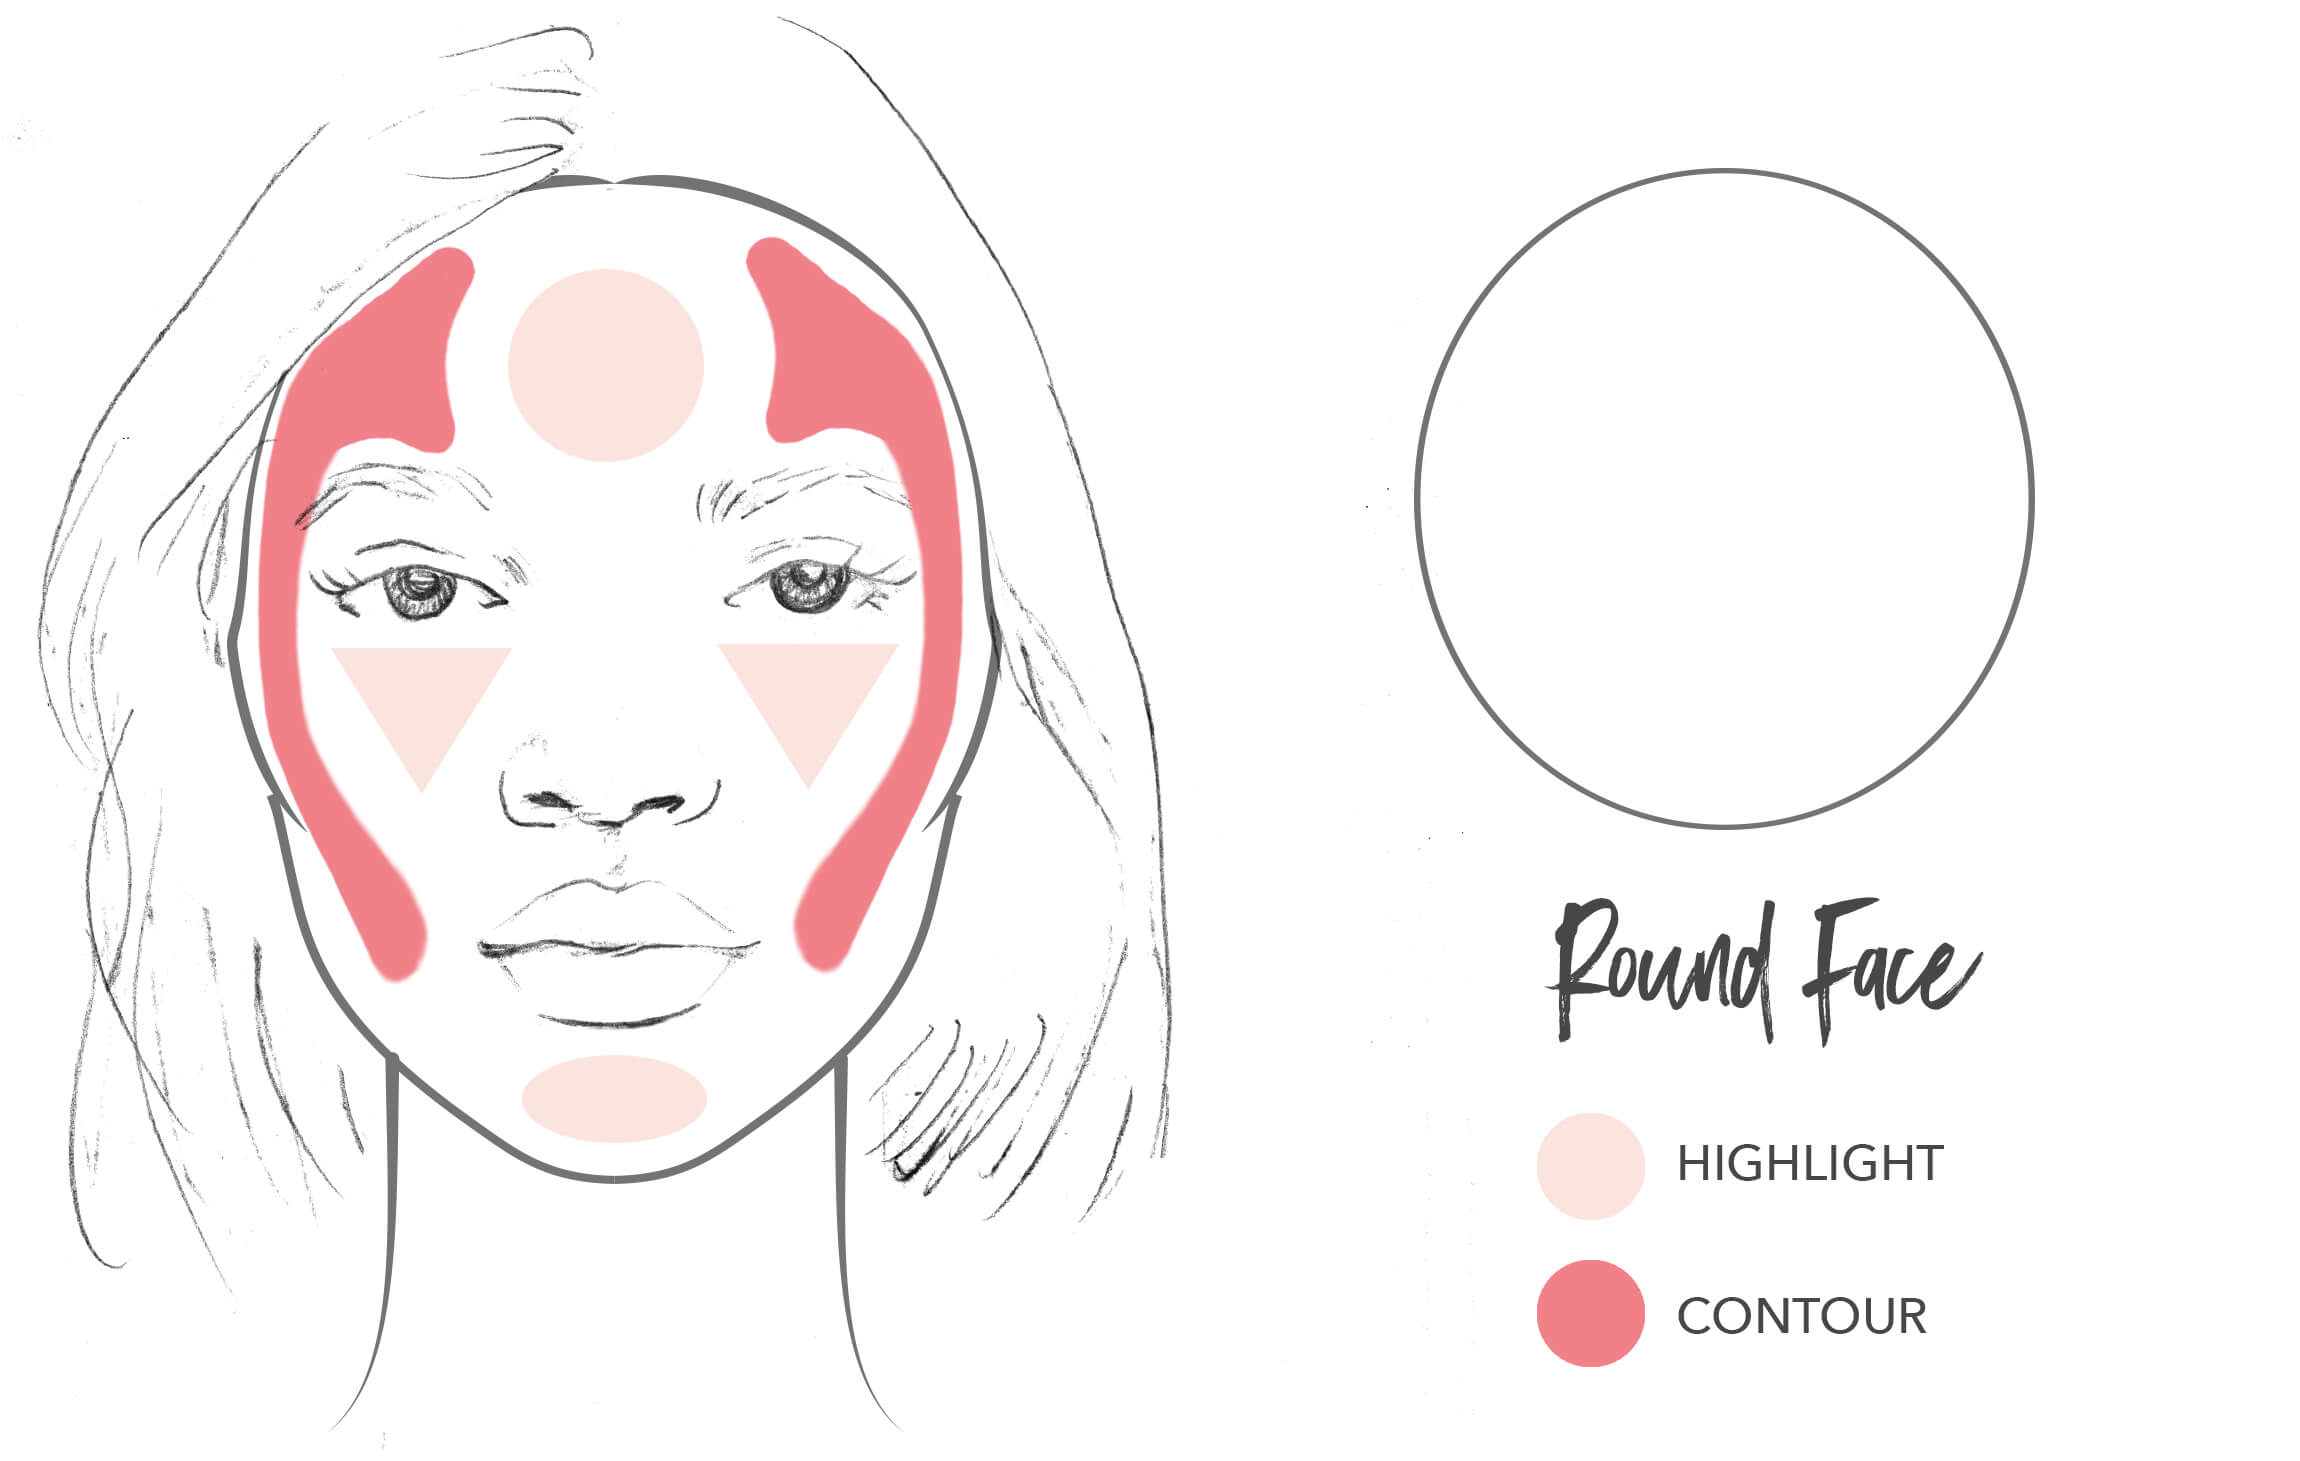 Contour face map for a round face